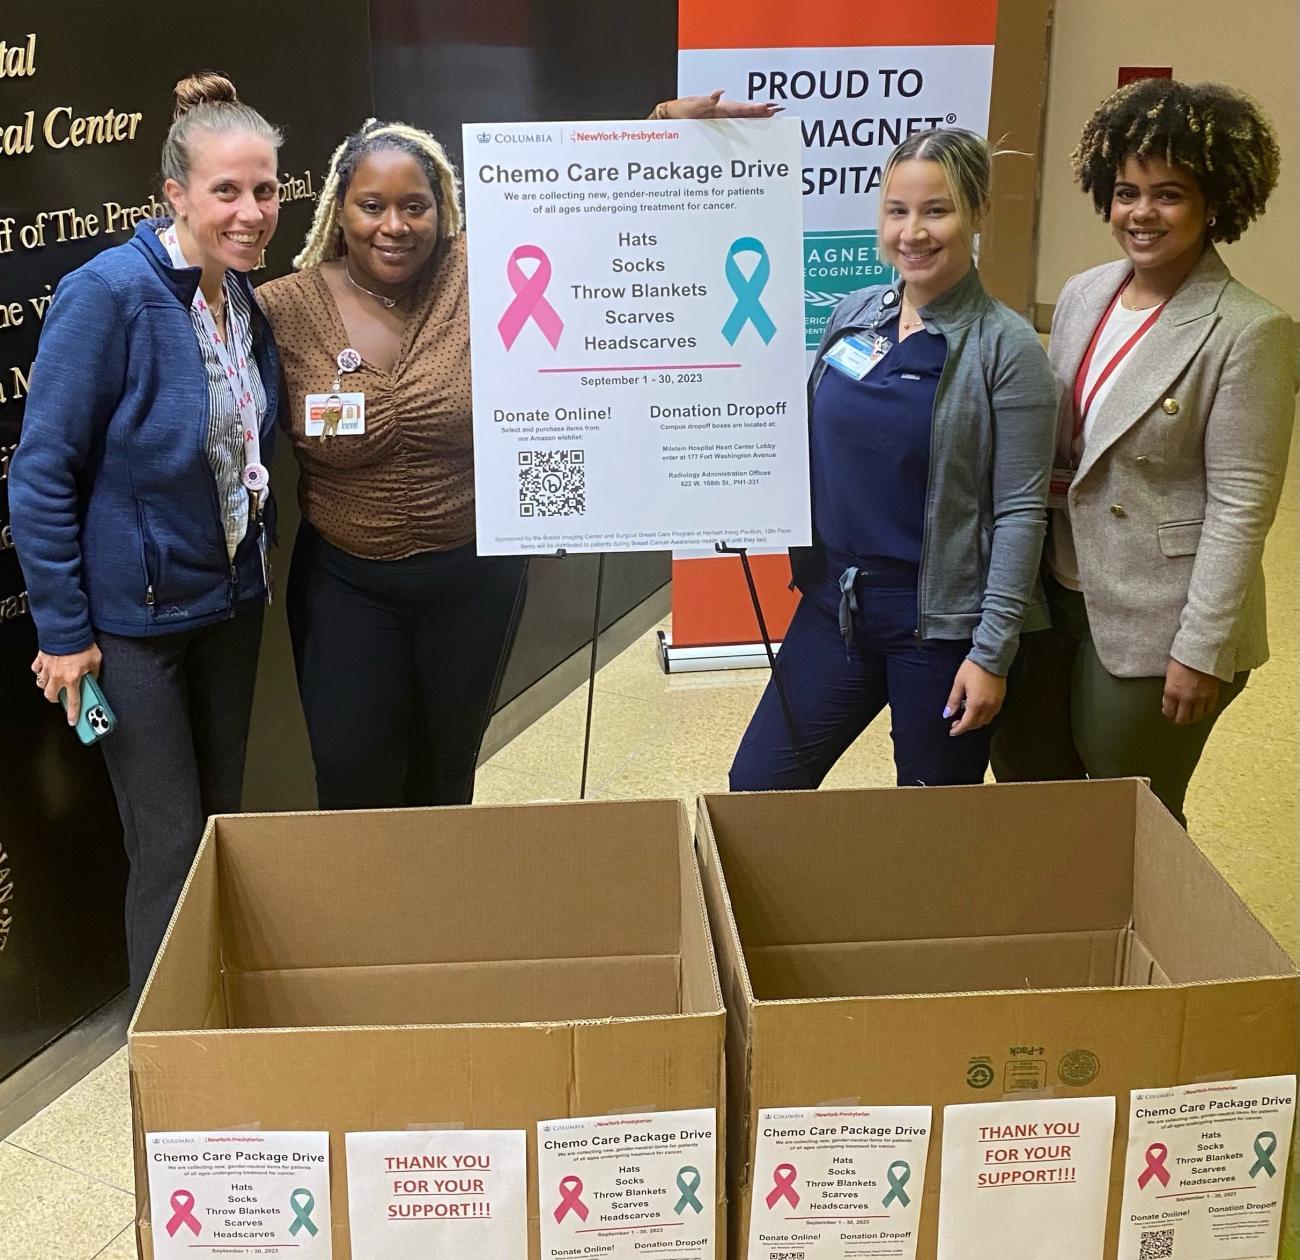 Columbia radiology and surgery staff members next to collection boxes for chemo care drive